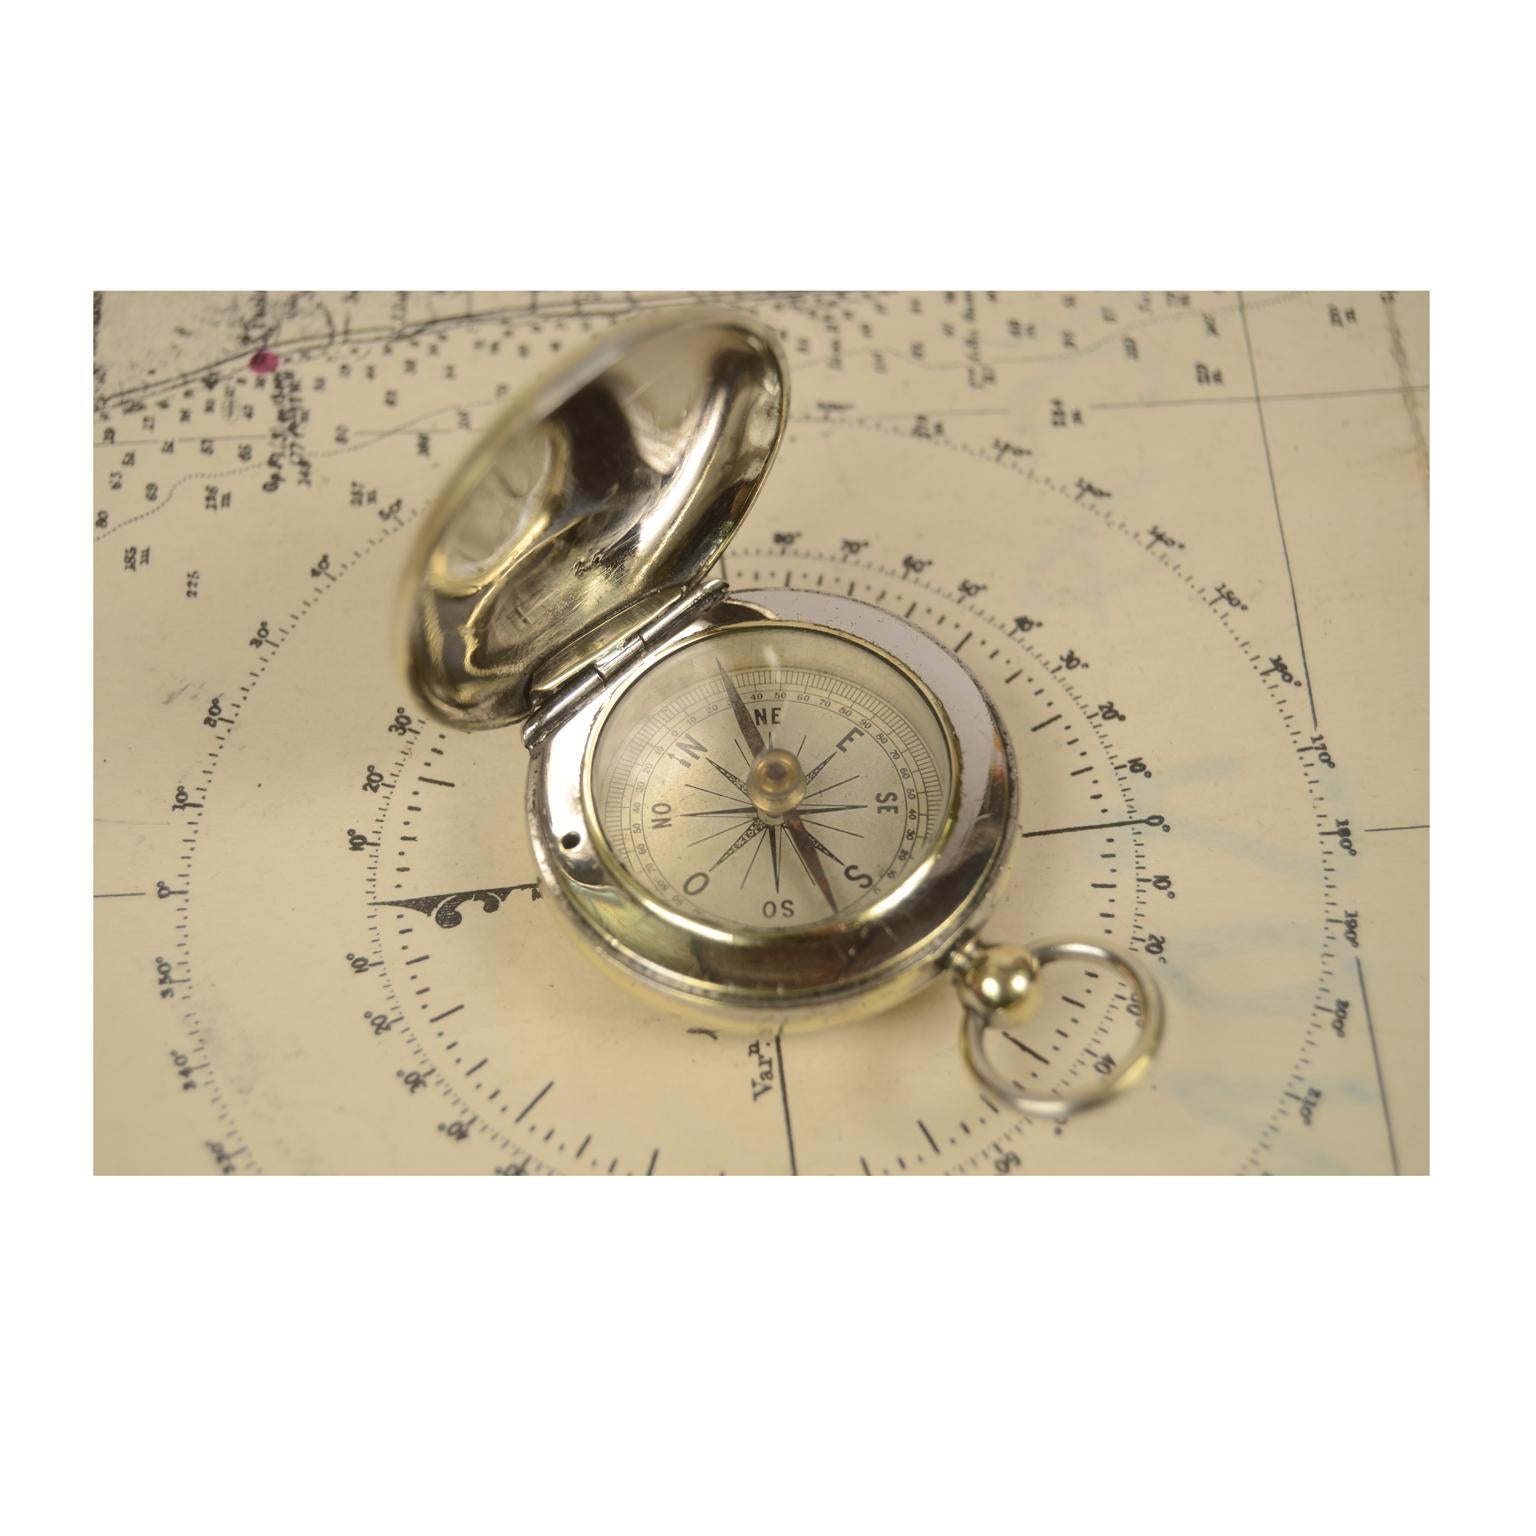 Brass pocket compass in the shape of a pocket watch, complete with lid. Six-wind compass card complete with goniometric circle for calculating horizontal angles. French manufacture of the 1920s. Excellent condition, fully functional. Measures: